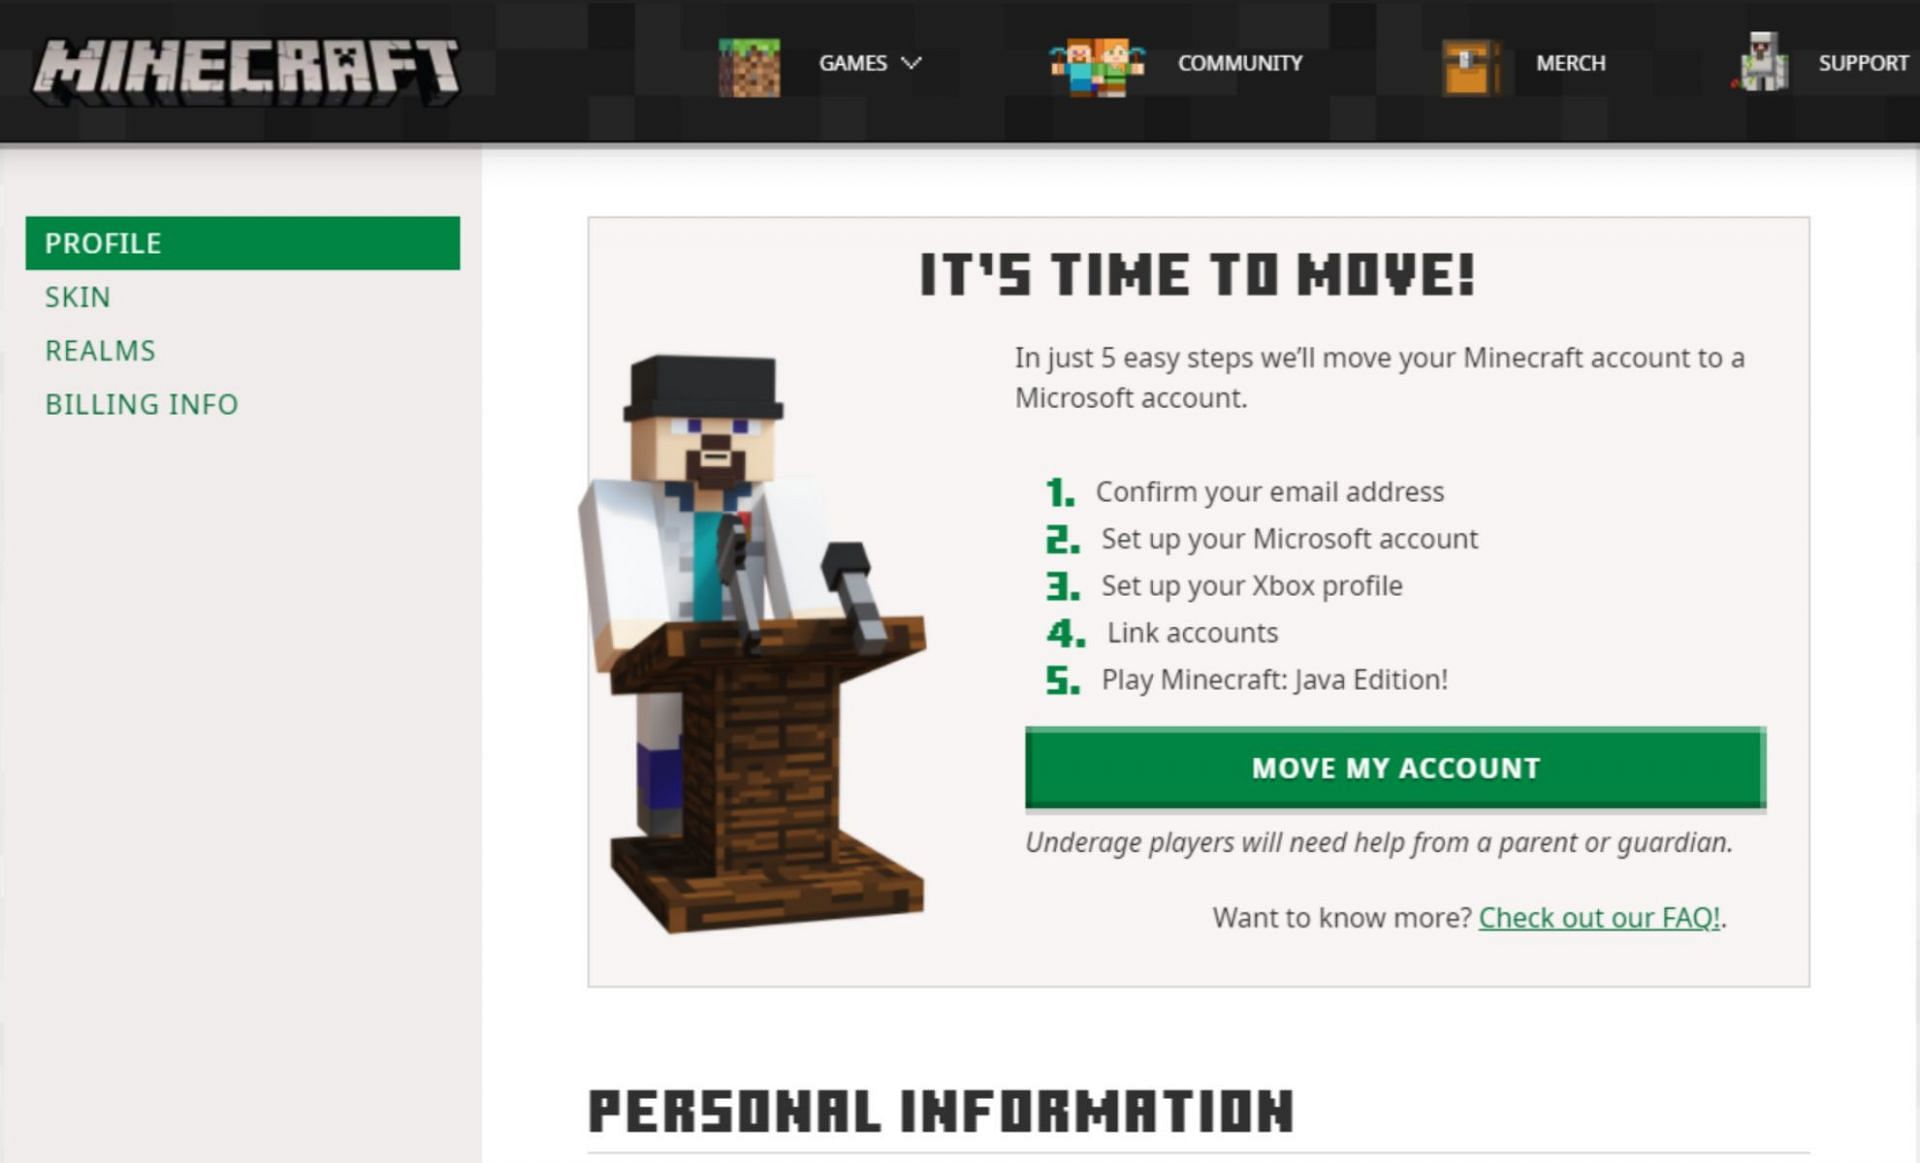 All Minecraft accounts must be migrated soon (Image via Mojang)